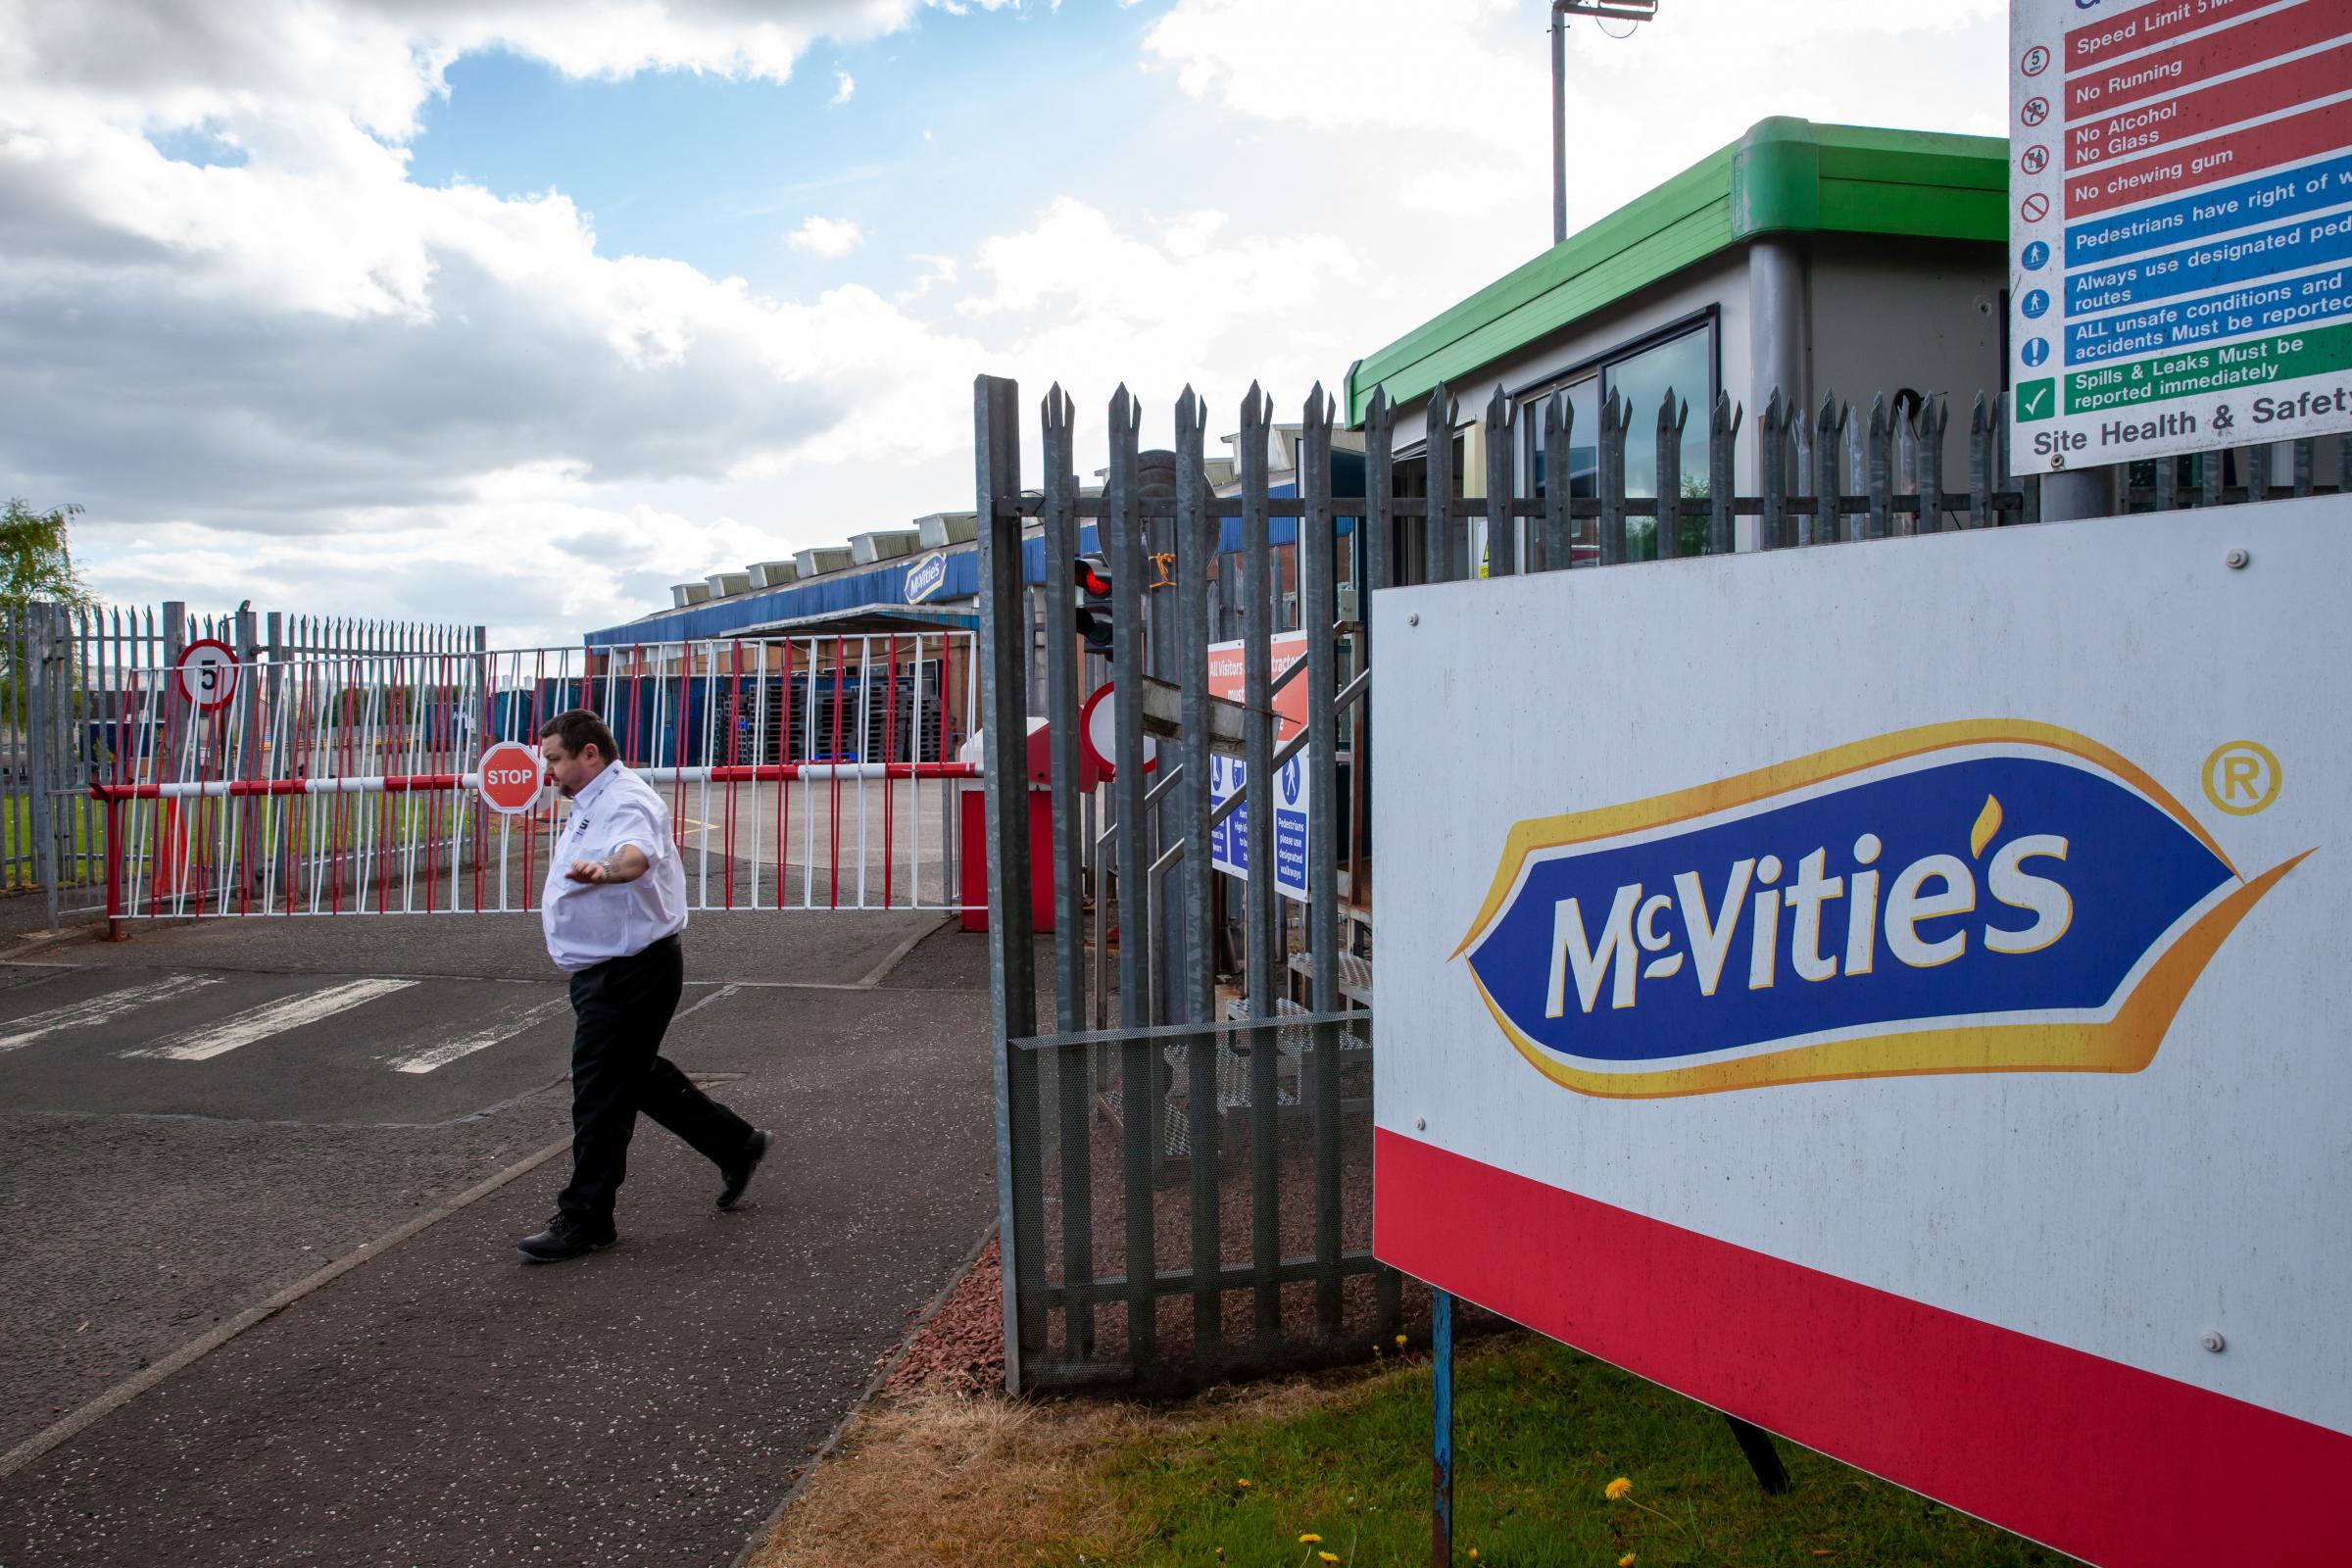 Nicola Sturgeon asked to 'eyeball' McVitie's owners to make offer to save Glasgow factory